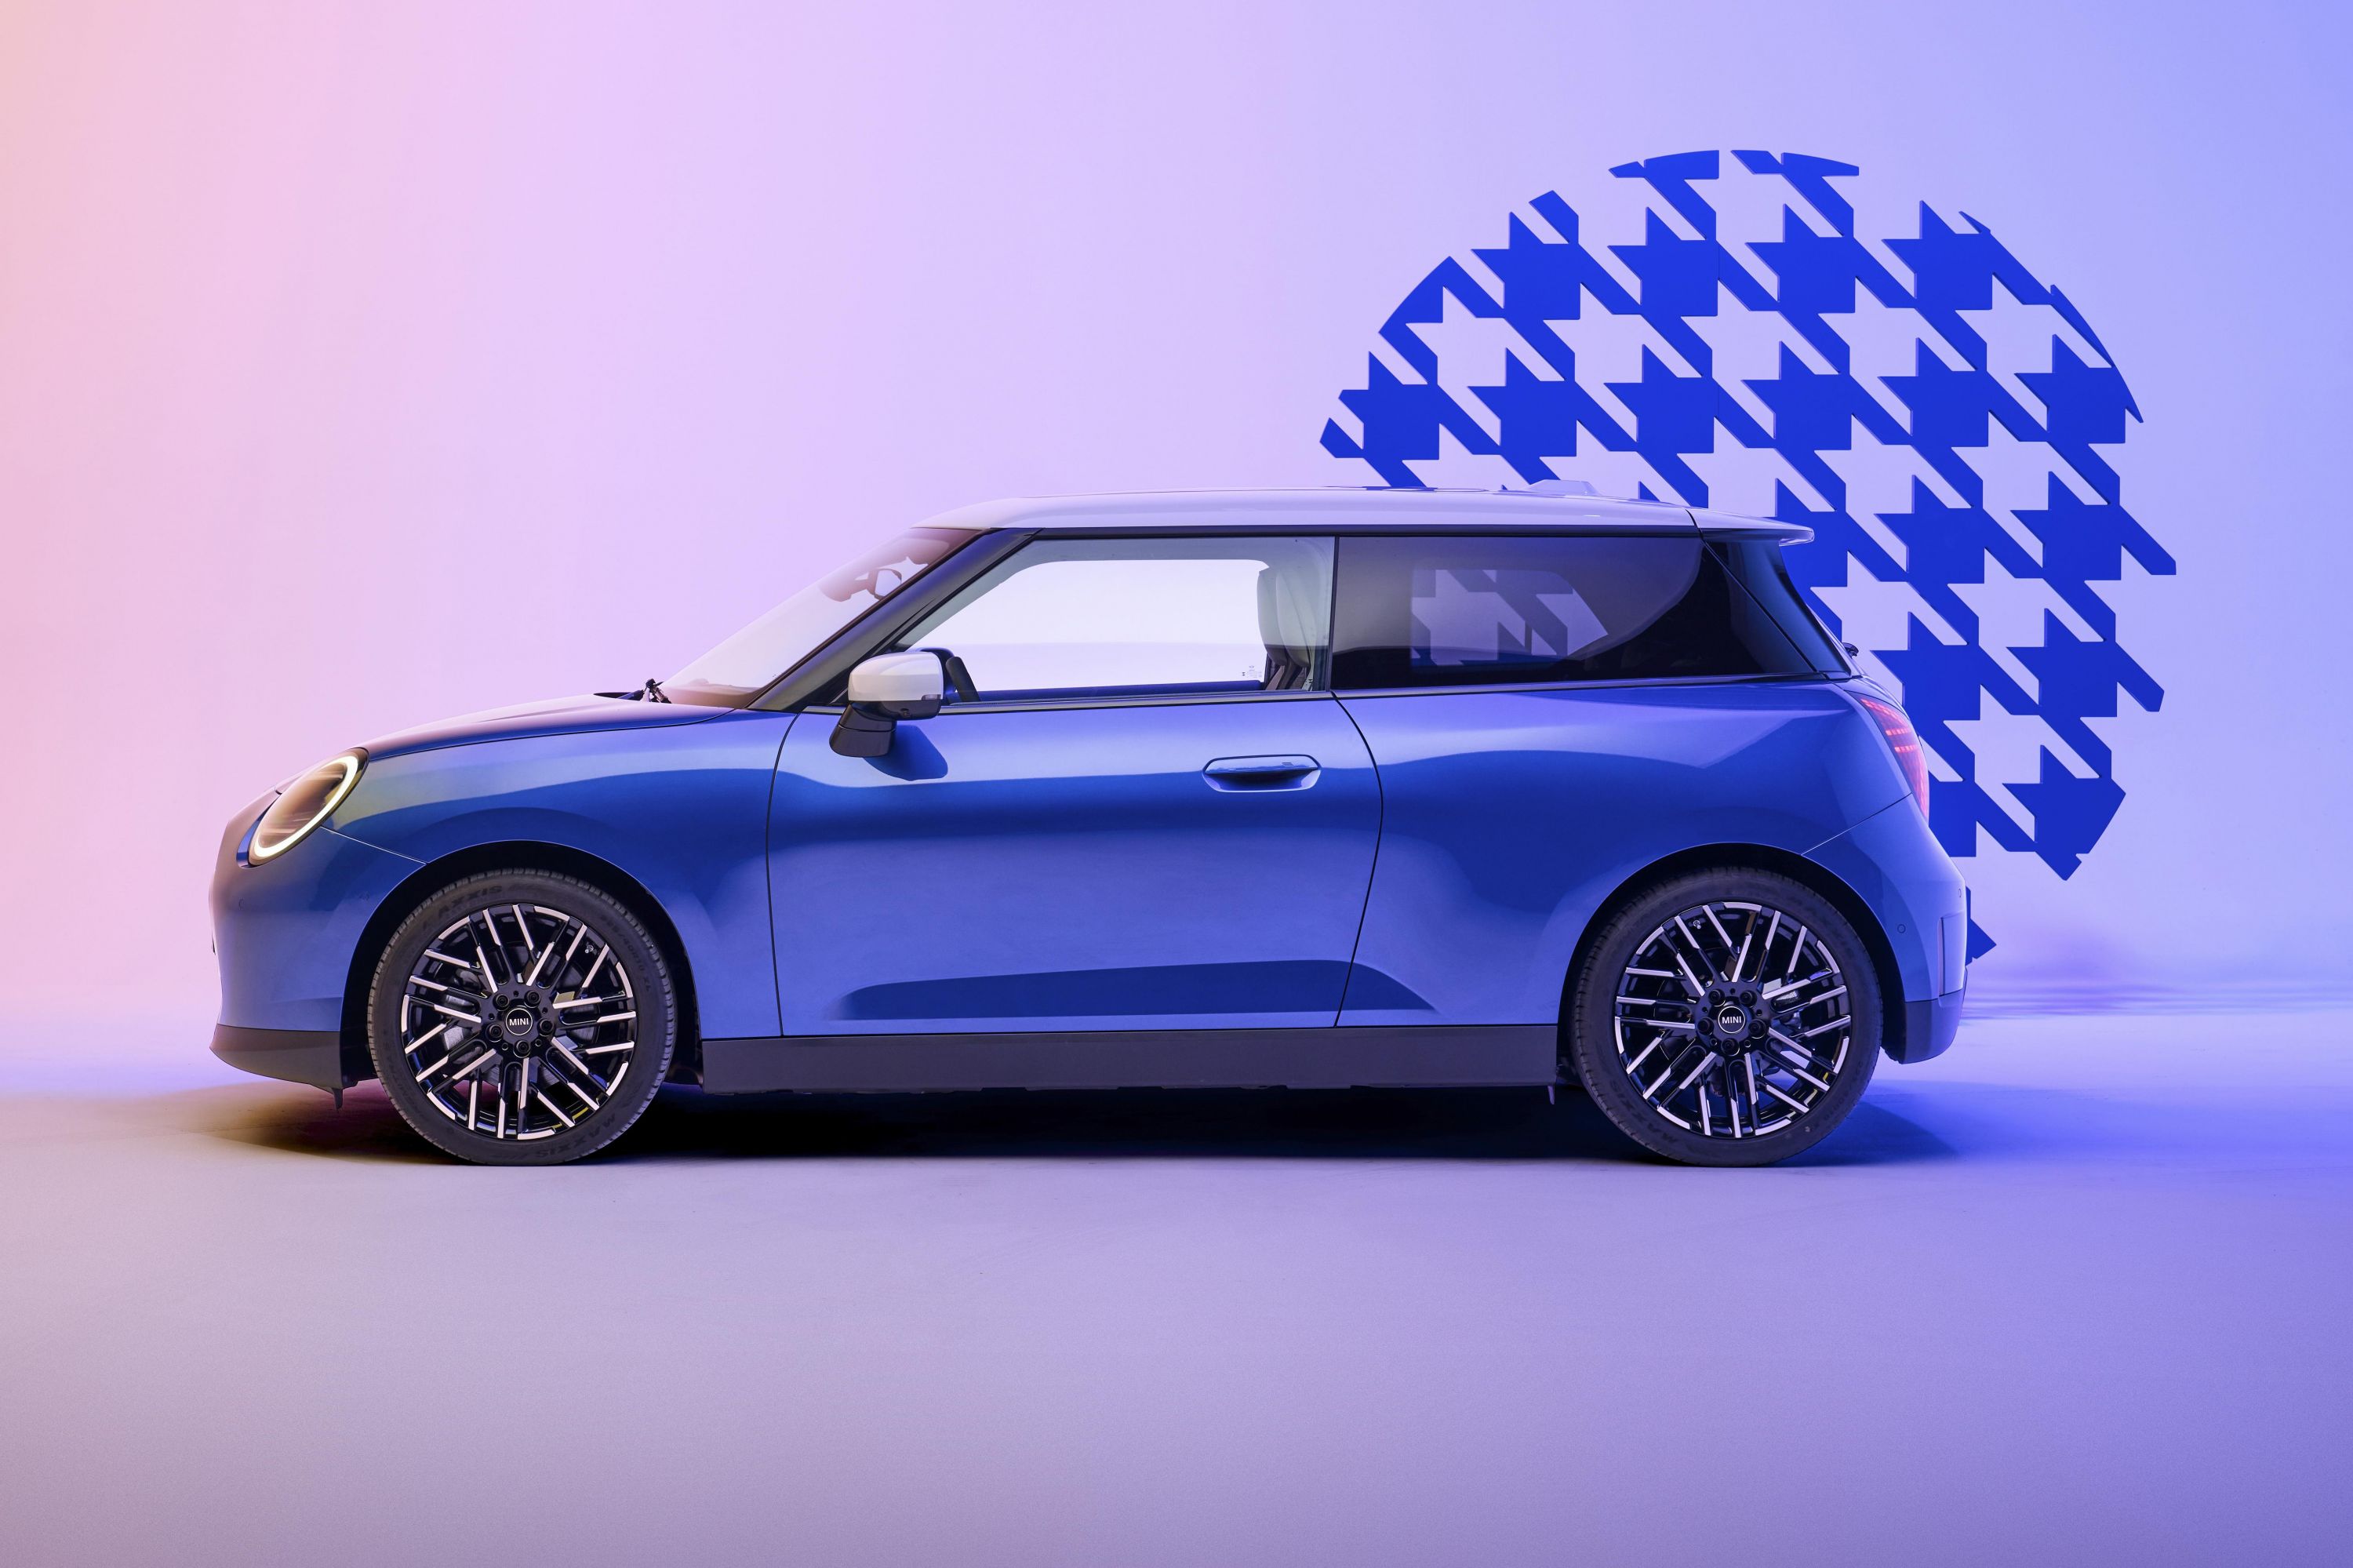 The new Mini Cooper electric car is now rolling down Chinese production ...